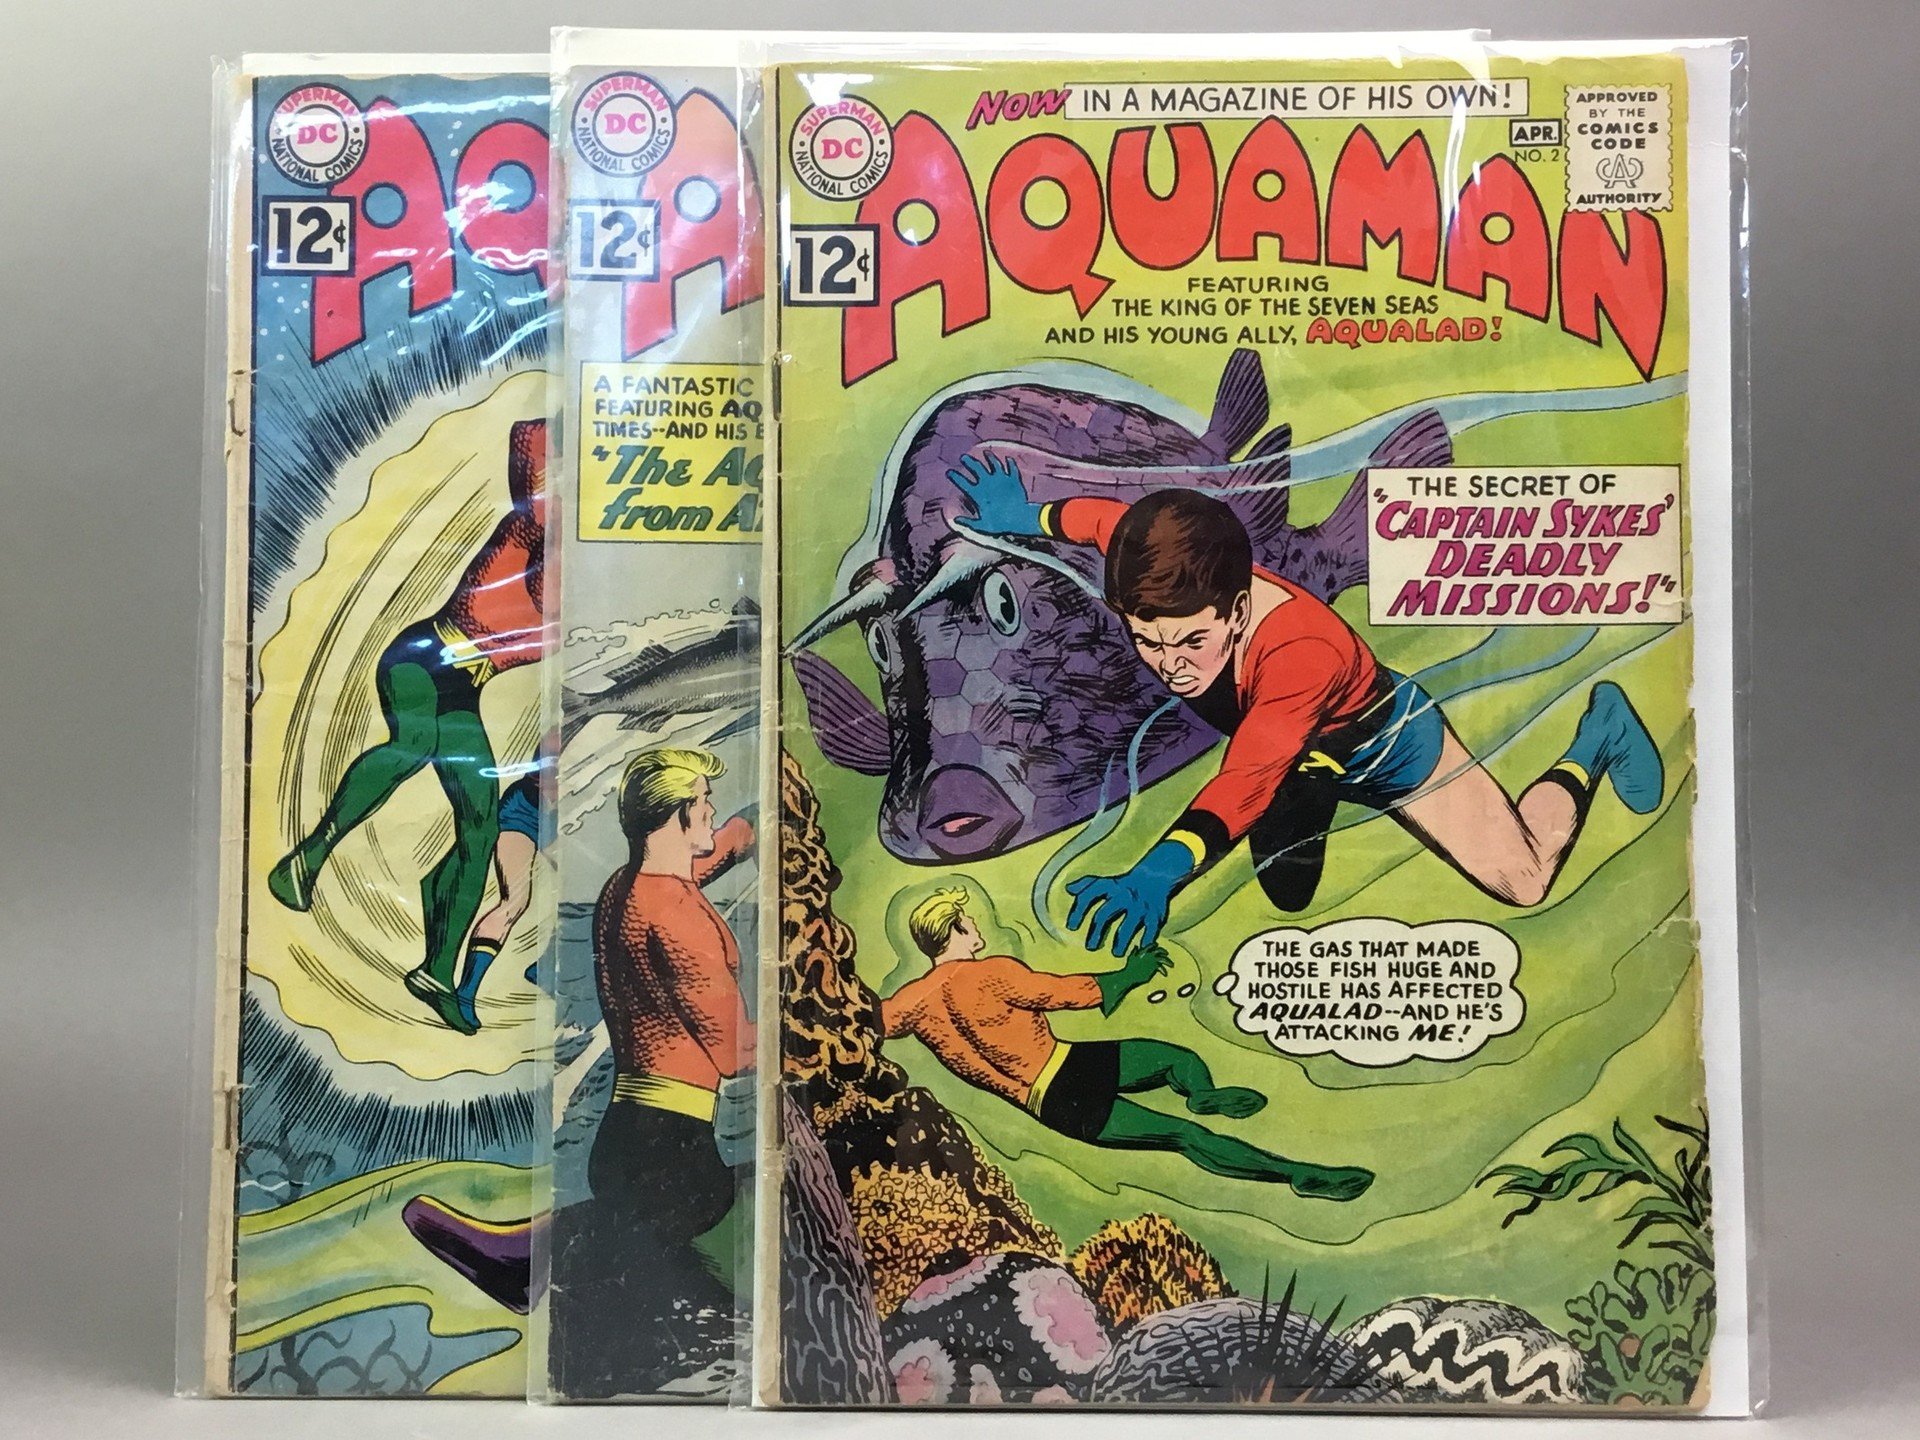 Key Silver Age lots in the auction include Aquaman No 2 from 1962, The Atom - numbers one through 45 - and several very early Justice League books from 1960. 